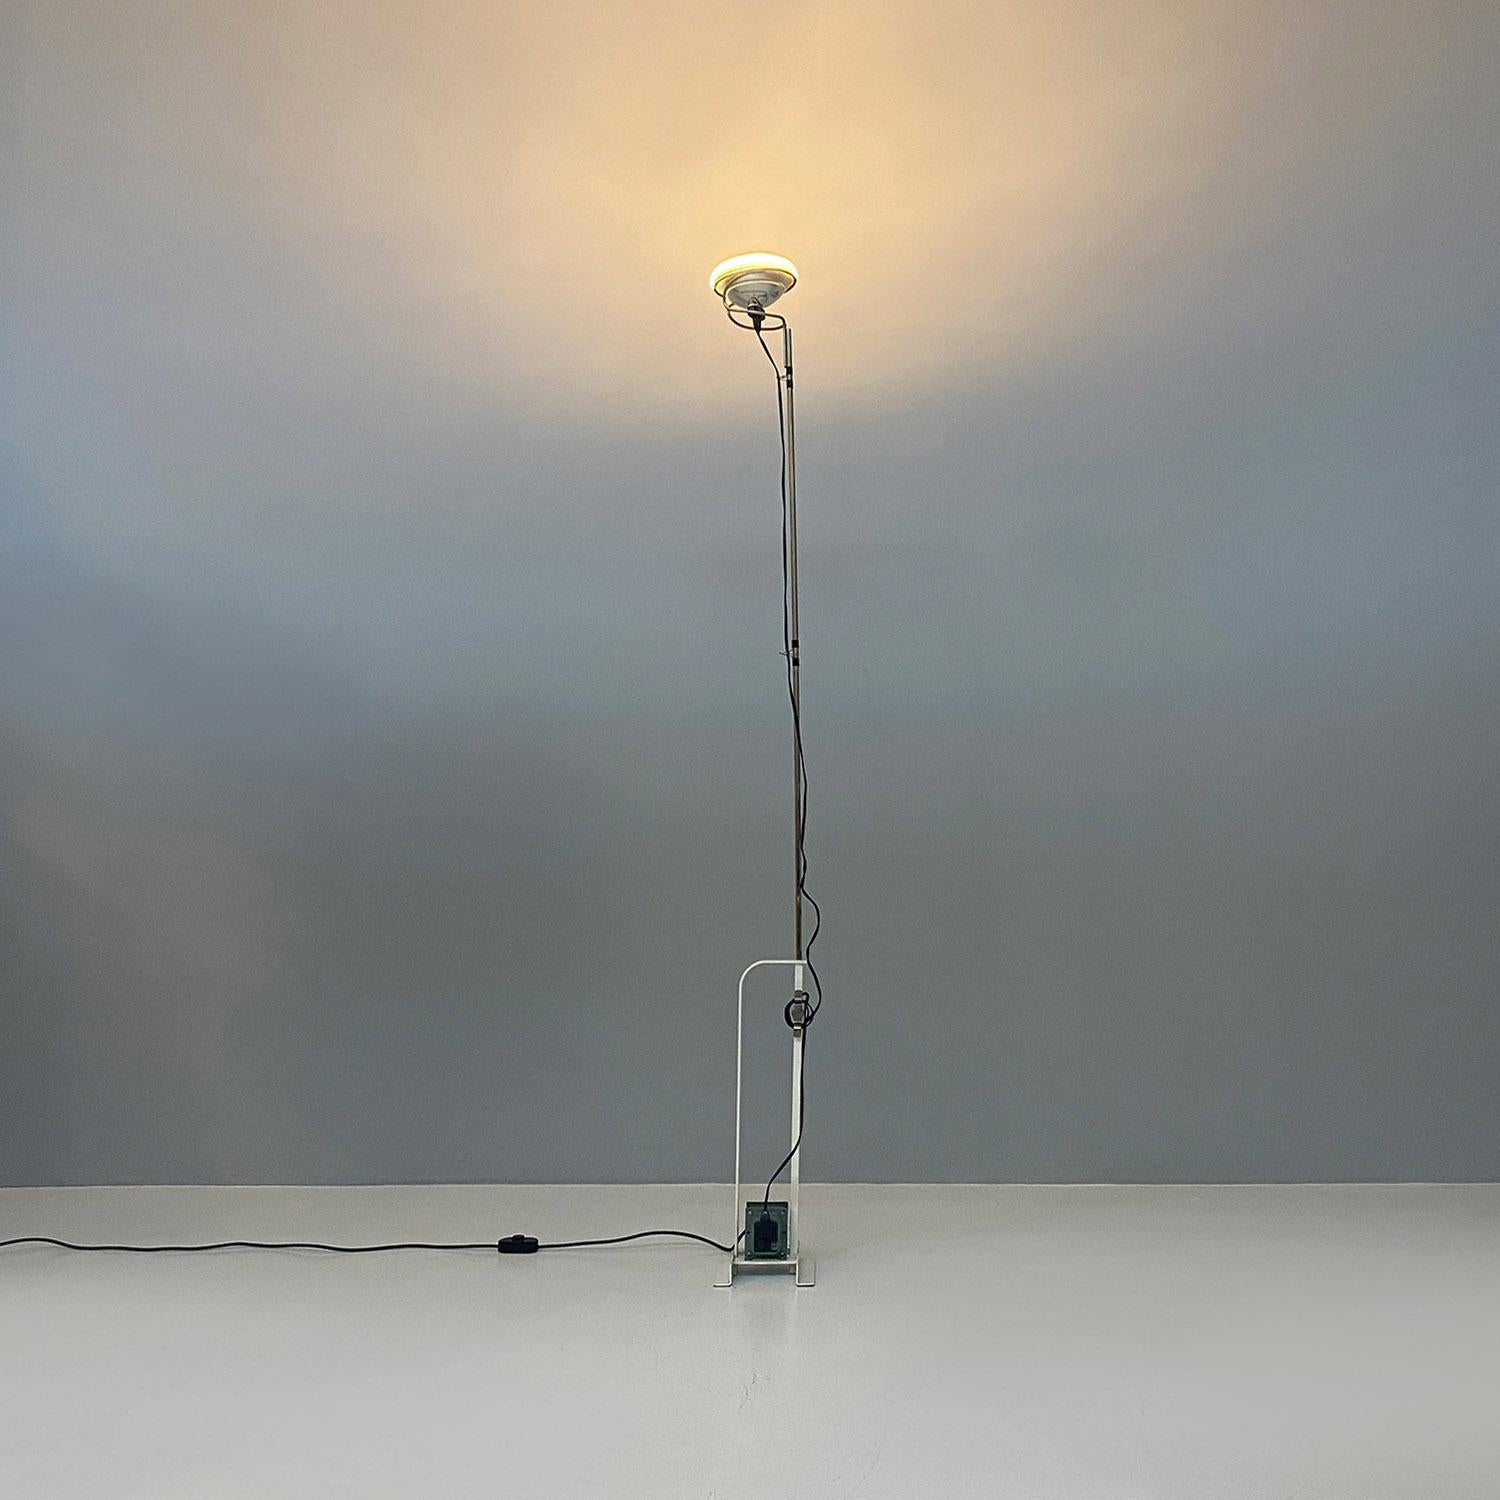 Italian modern white metal Toio floor lamp by Castiglioni Brothers, Flos, 1970s For Sale 1